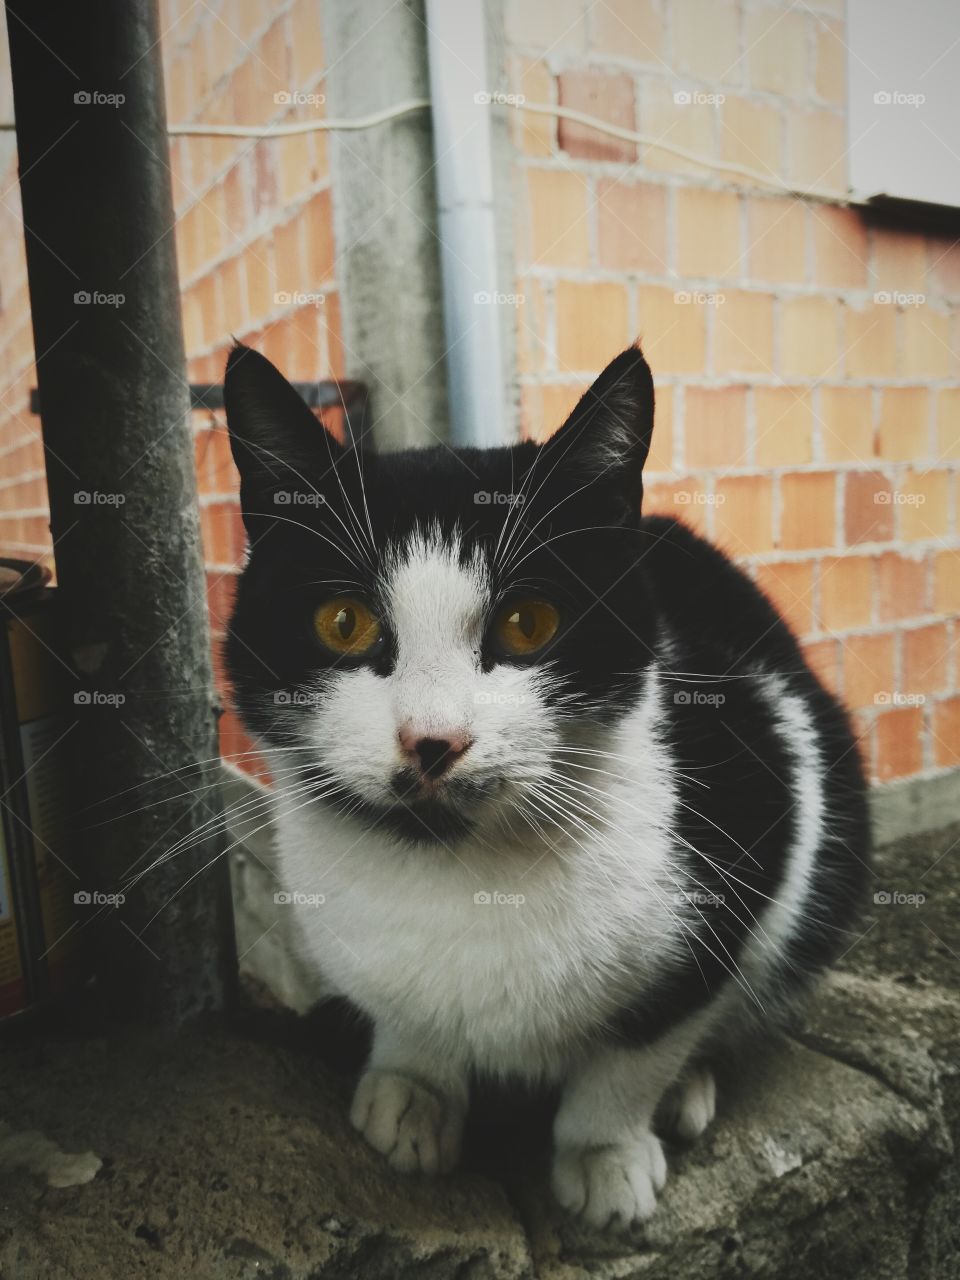 Black and white cat with yellow eyes